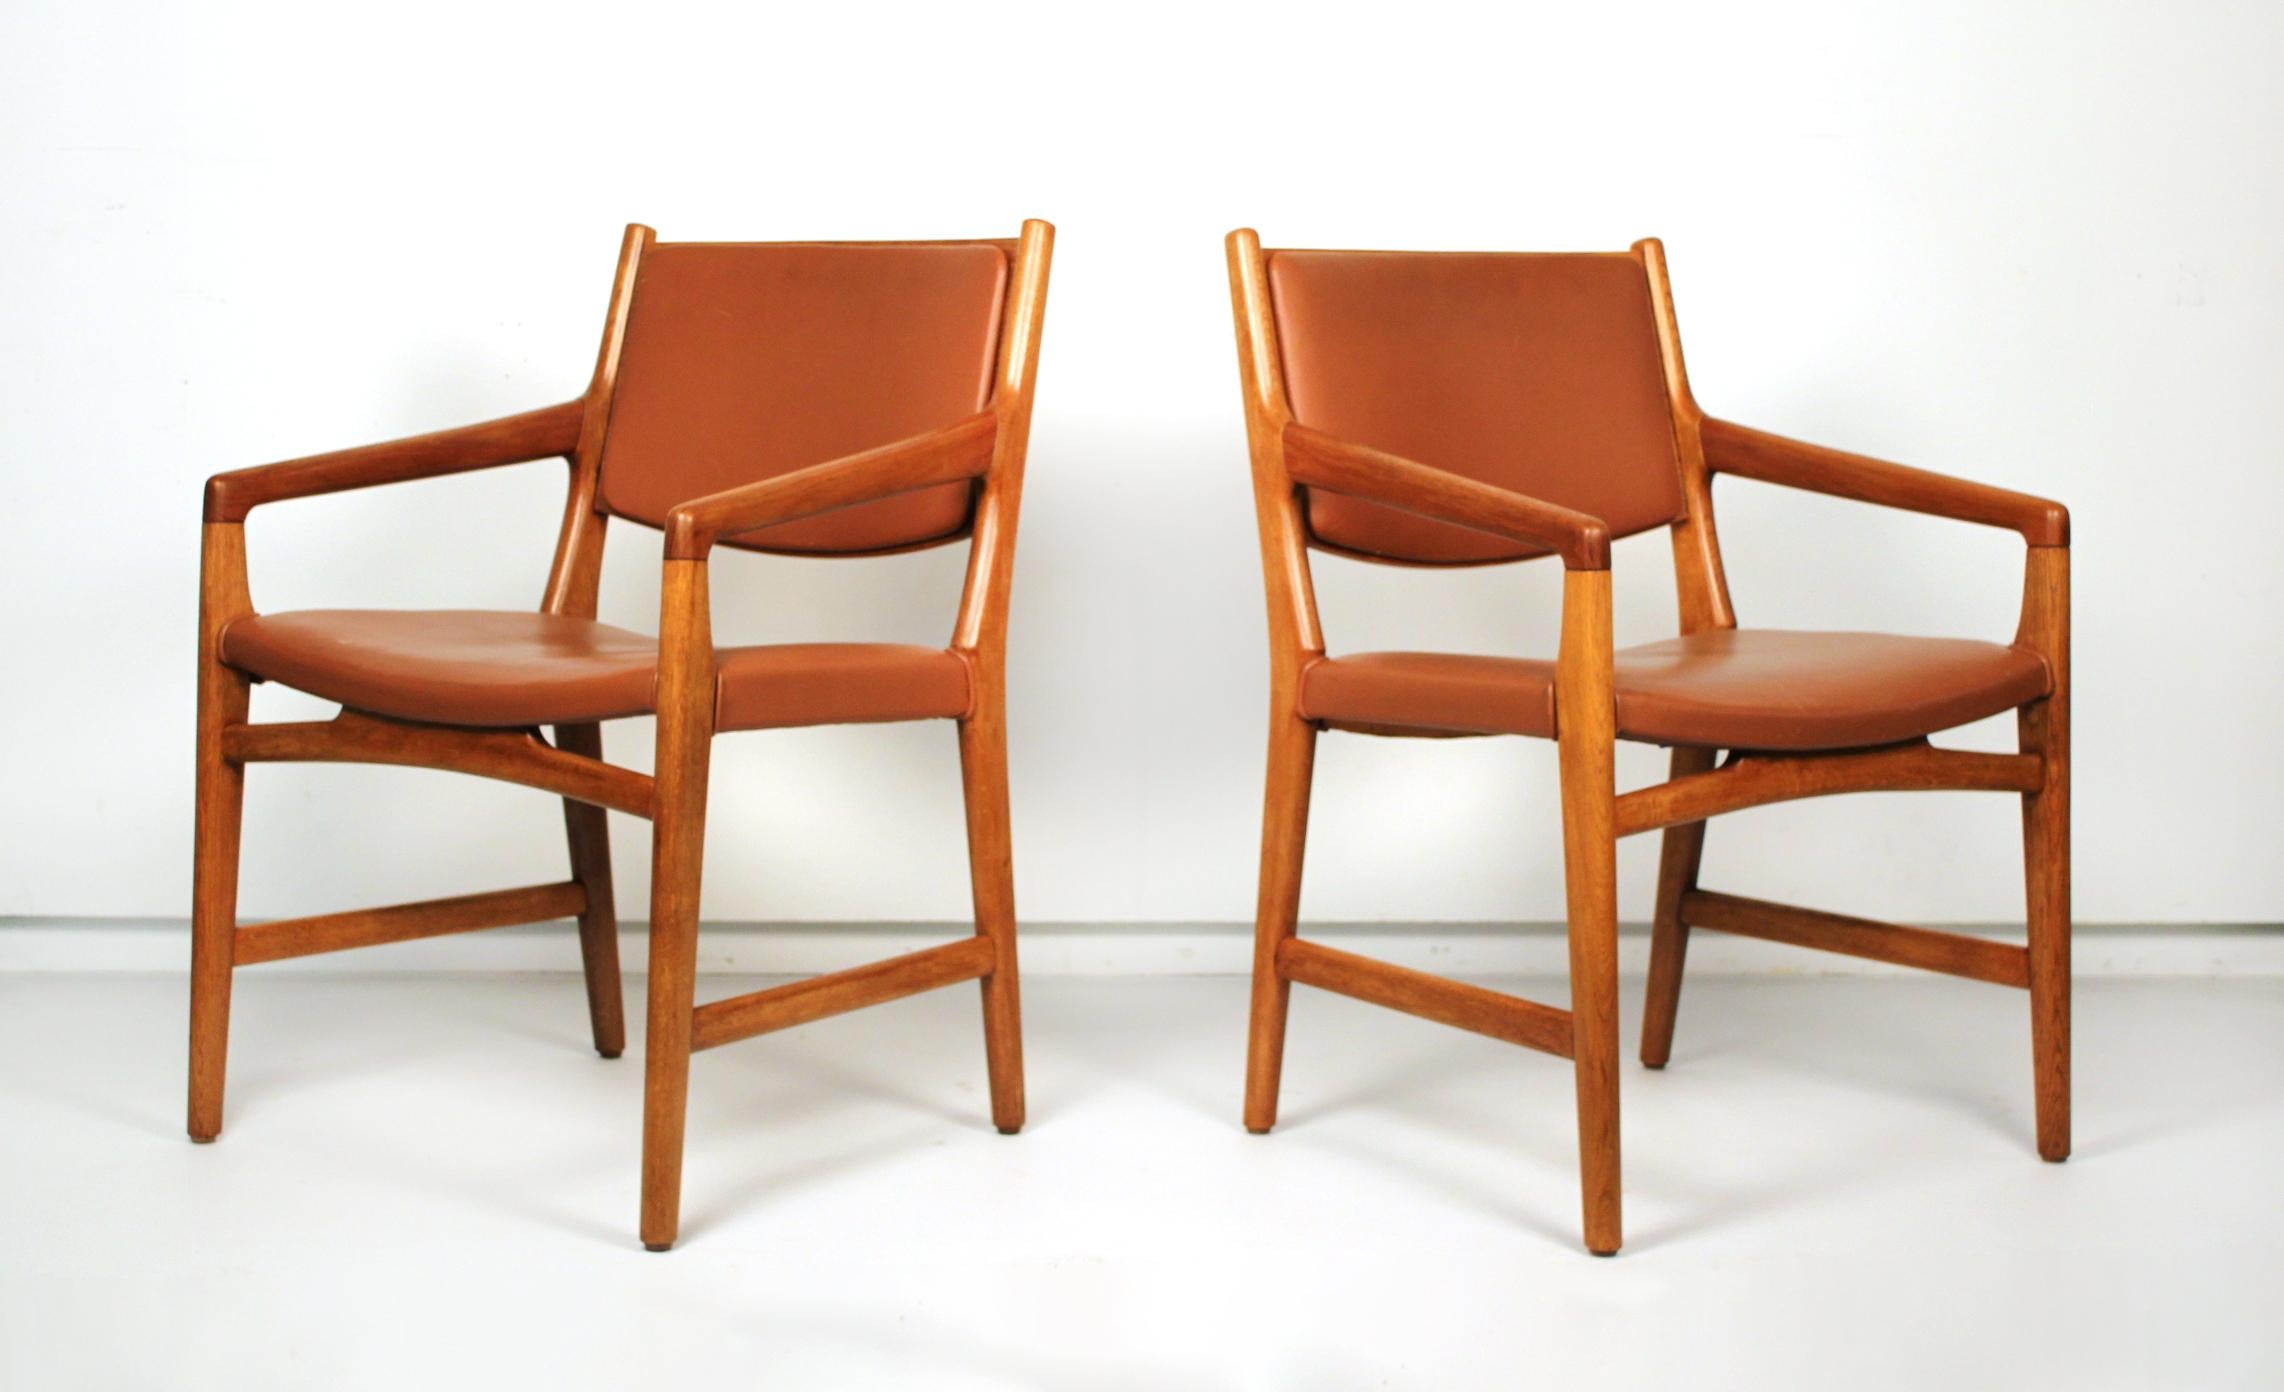 This design was custom-ordered for the interior of Magasin du Nord's department store in the 1950s. Few examples were produced and used in the retailer's shoe department. This set of chairs comes from this collection. 

They were custom made by